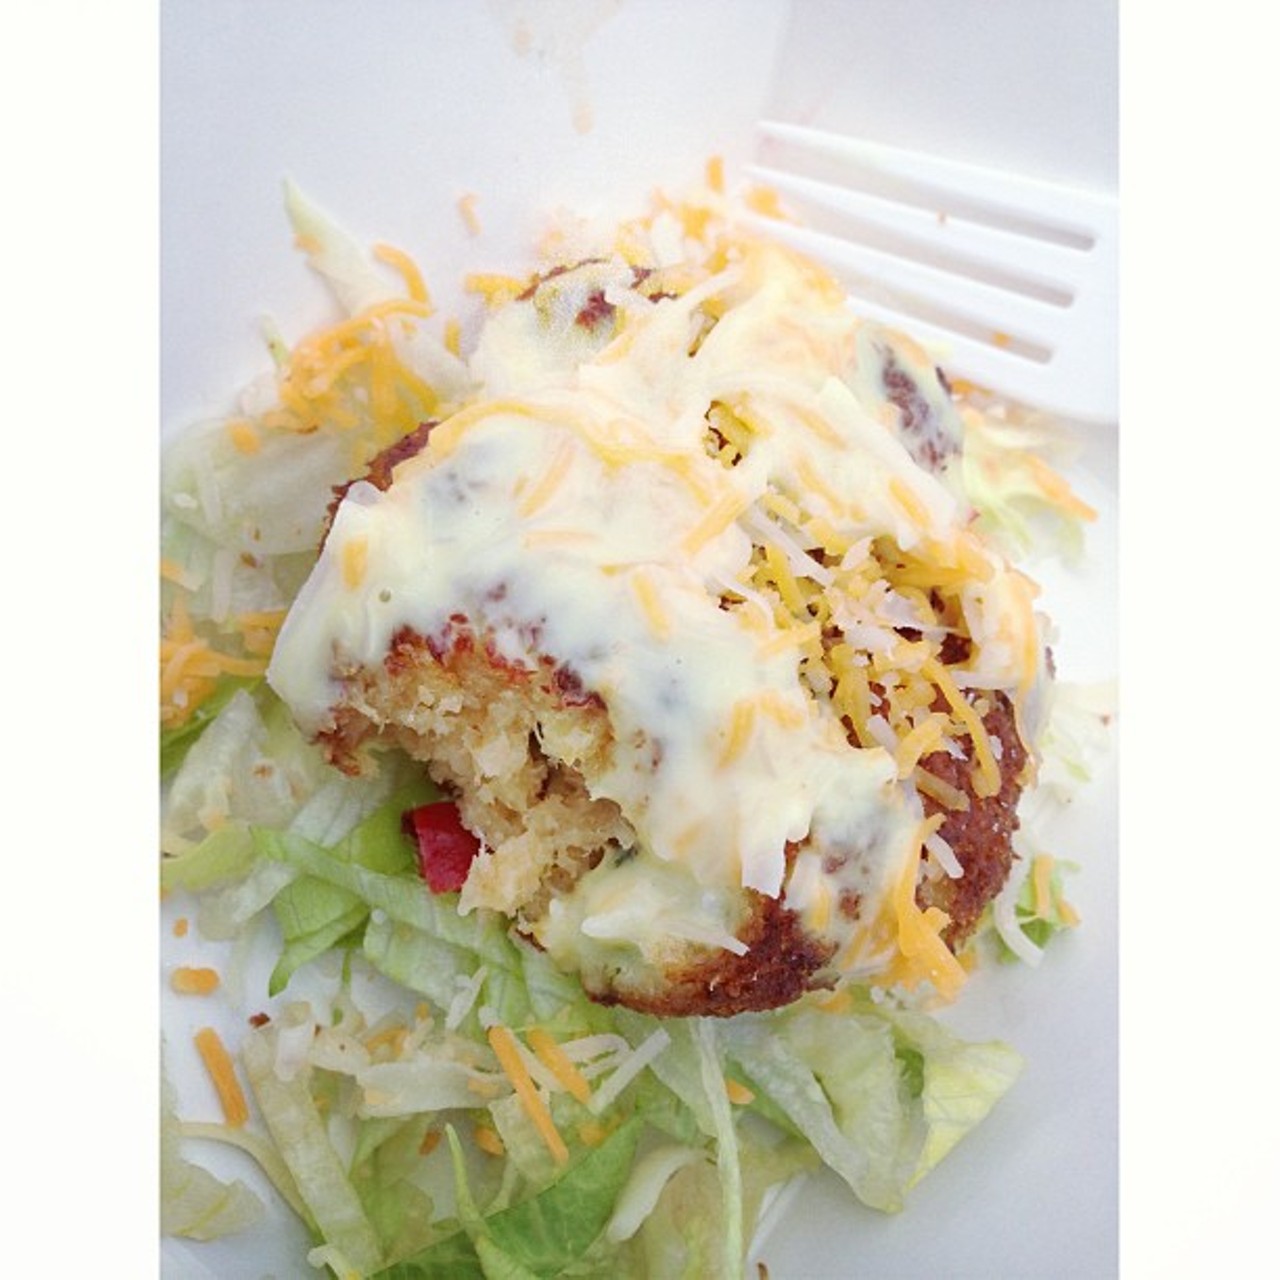 Mexican style crab cake #TasteOfHudson #Hudson #FoodFestival #crab #mexican #cheese